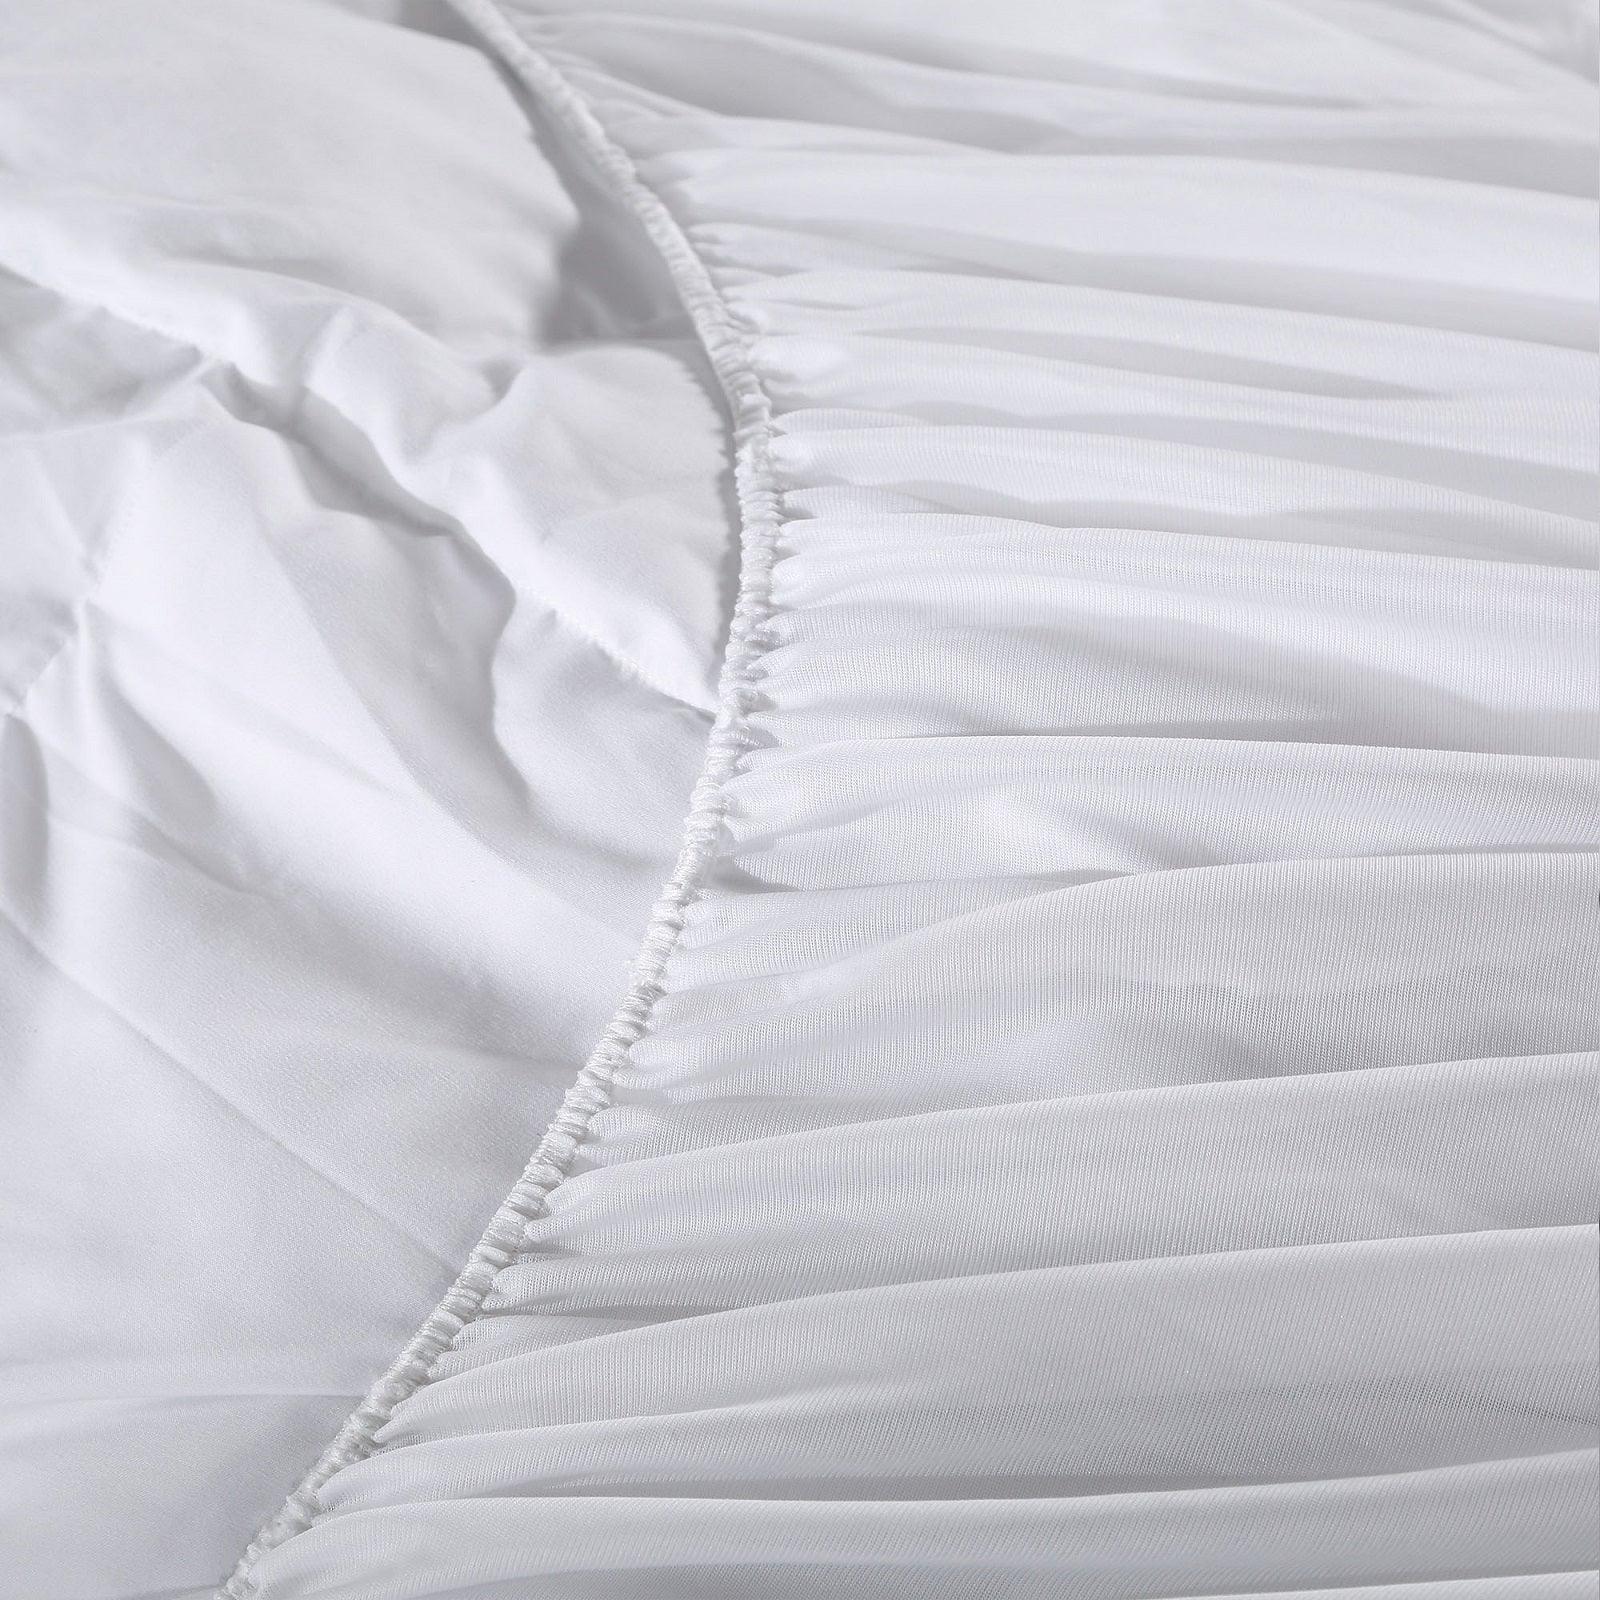 Royal Comfort 1000GSM Luxury Bamboo Fabric Gusset Mattress Pad Topper Cover - Queen - White